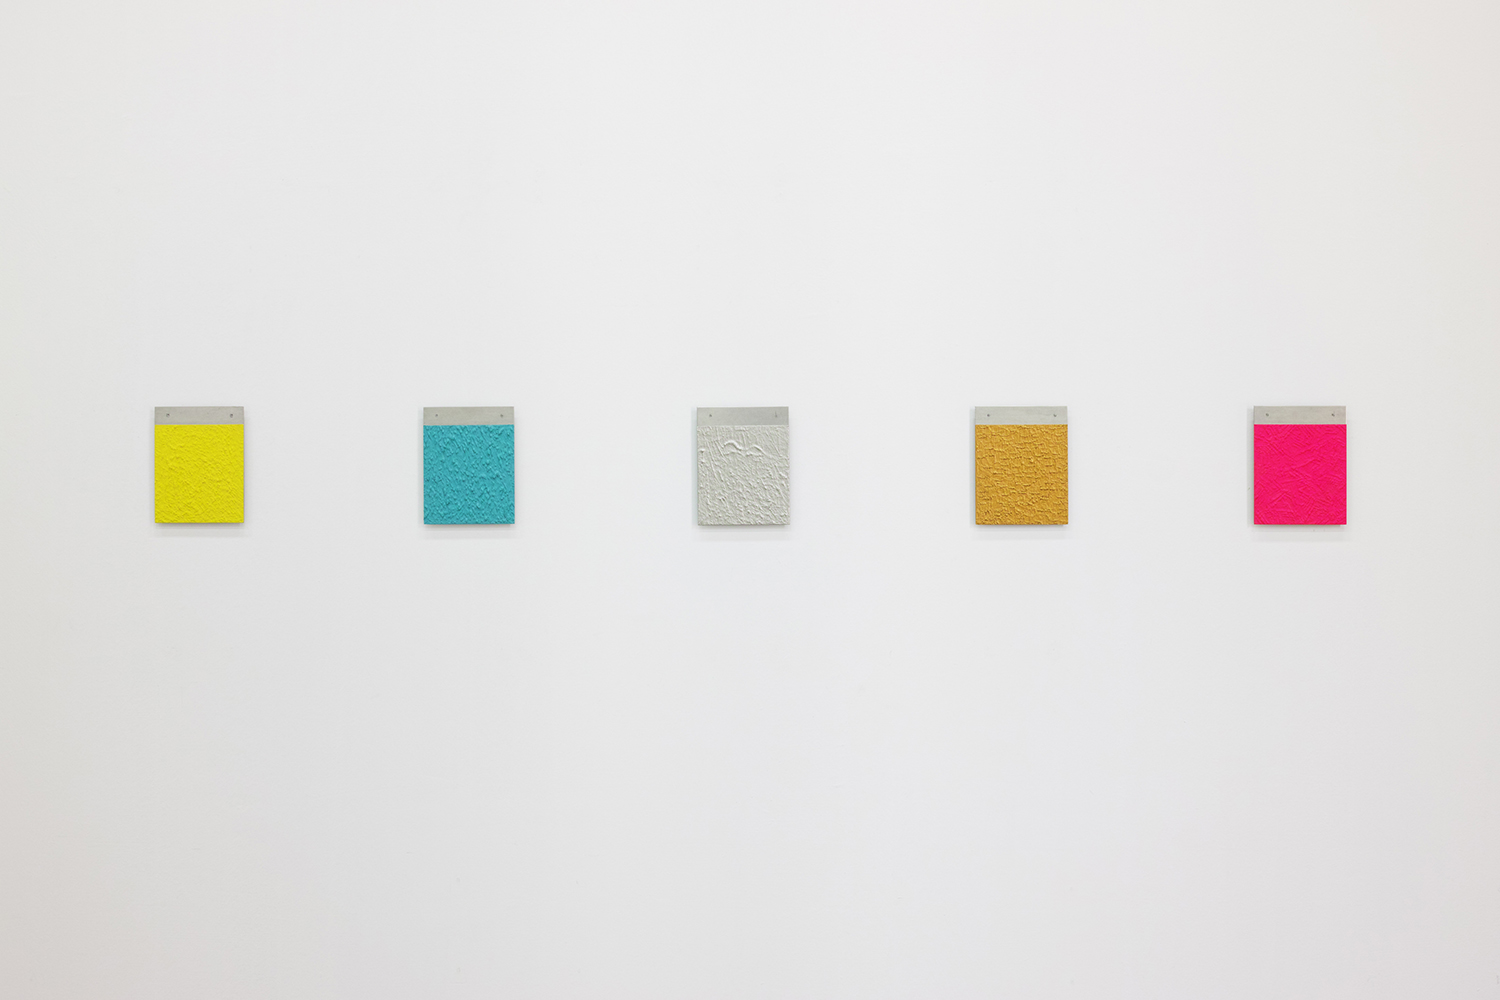 Installation View: Oil on aluminum series｜180 x 140 mm｜2016 each